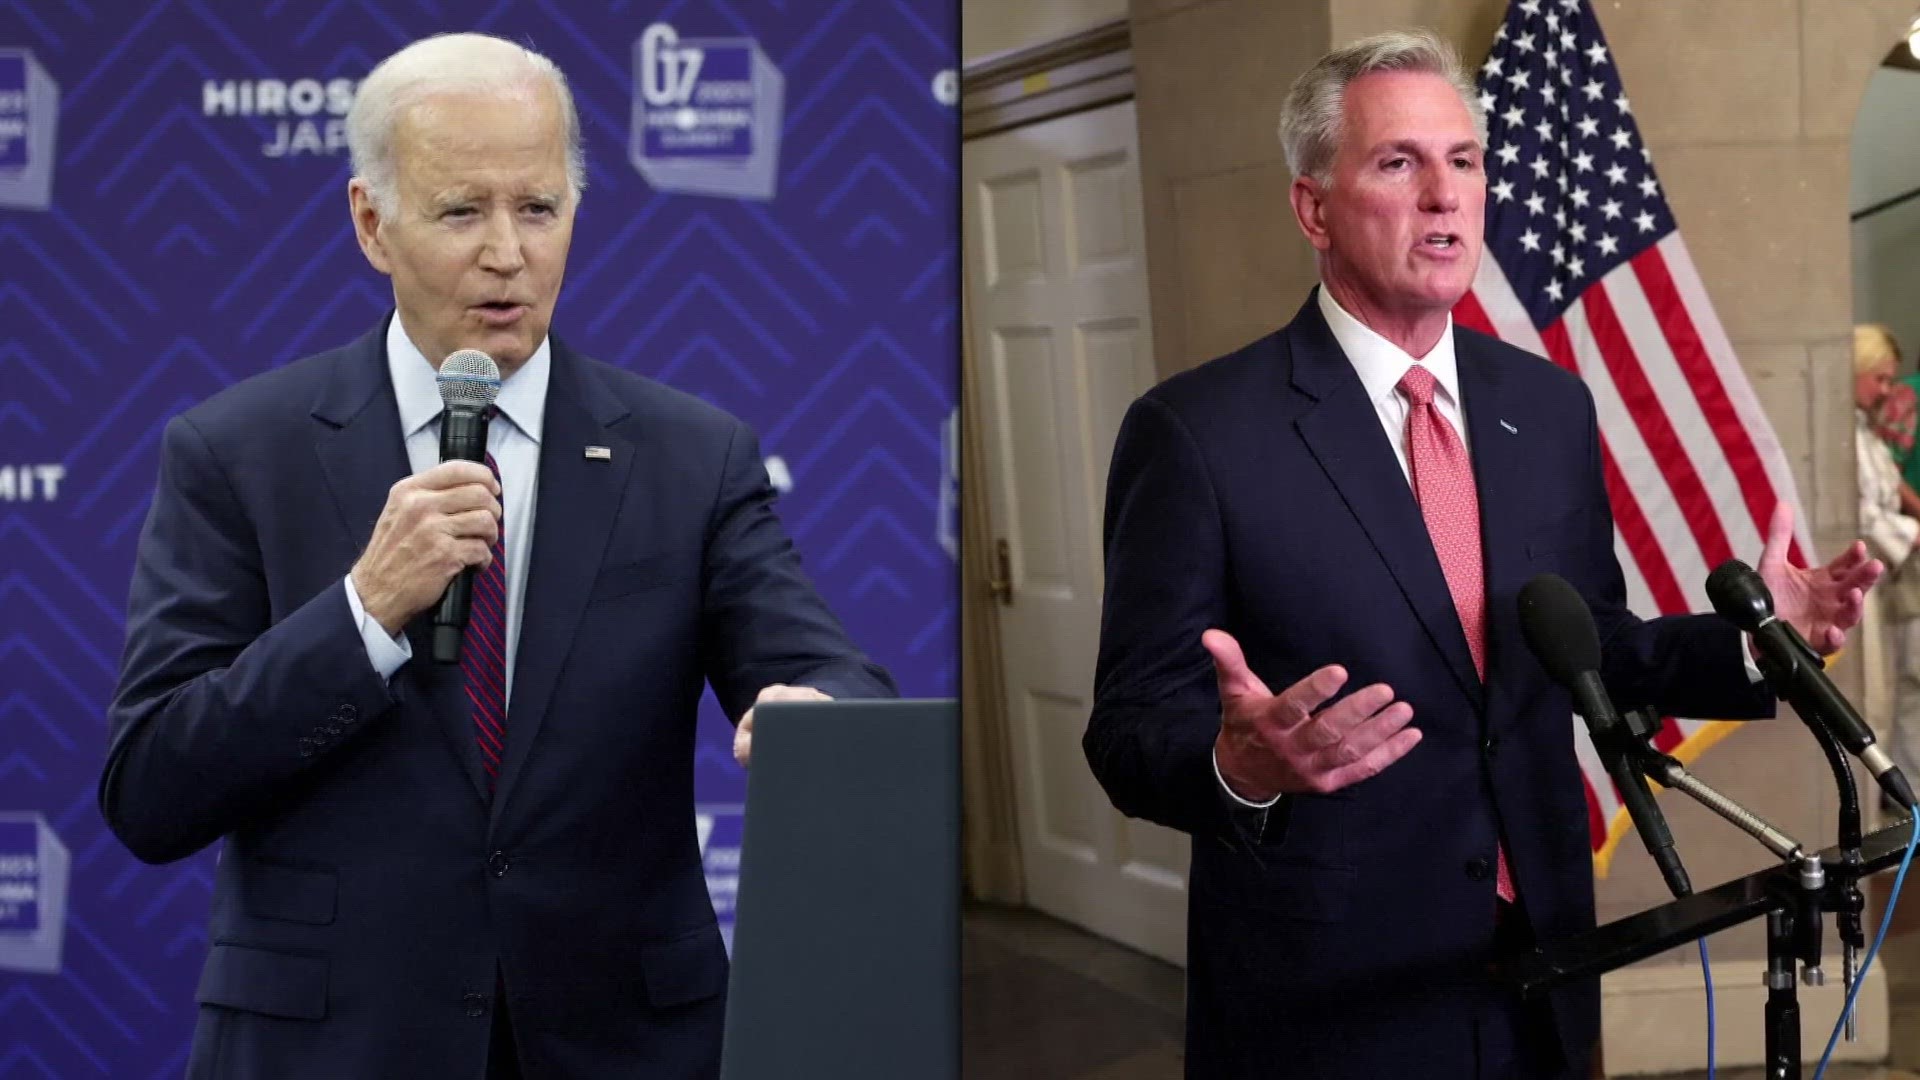 President Biden and House Speaker McCarthy are set to meet Monday as Washington works to strike a budget compromise and raise the nation's borrowing limit.